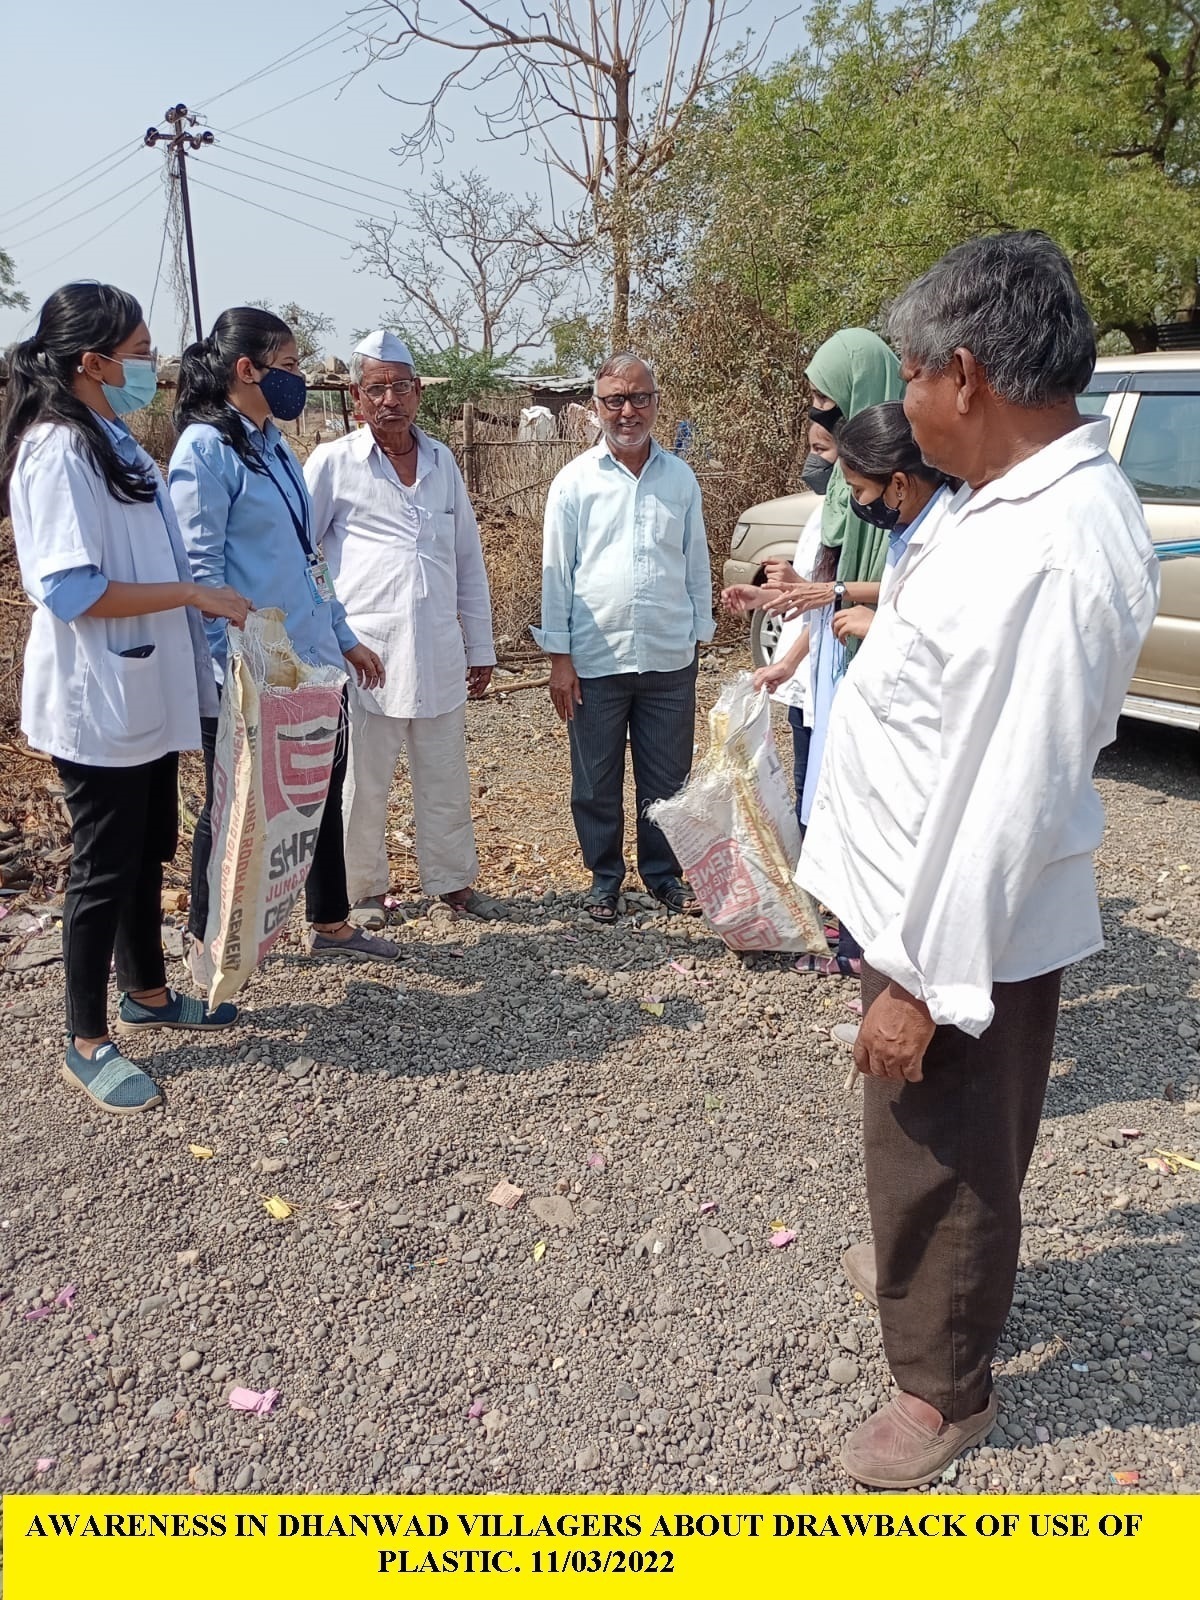 AWARENESS IN DHANWAD VILLAGERS ABOUT DRAWBACK OF USE OF PLASTIC 11/03/2022